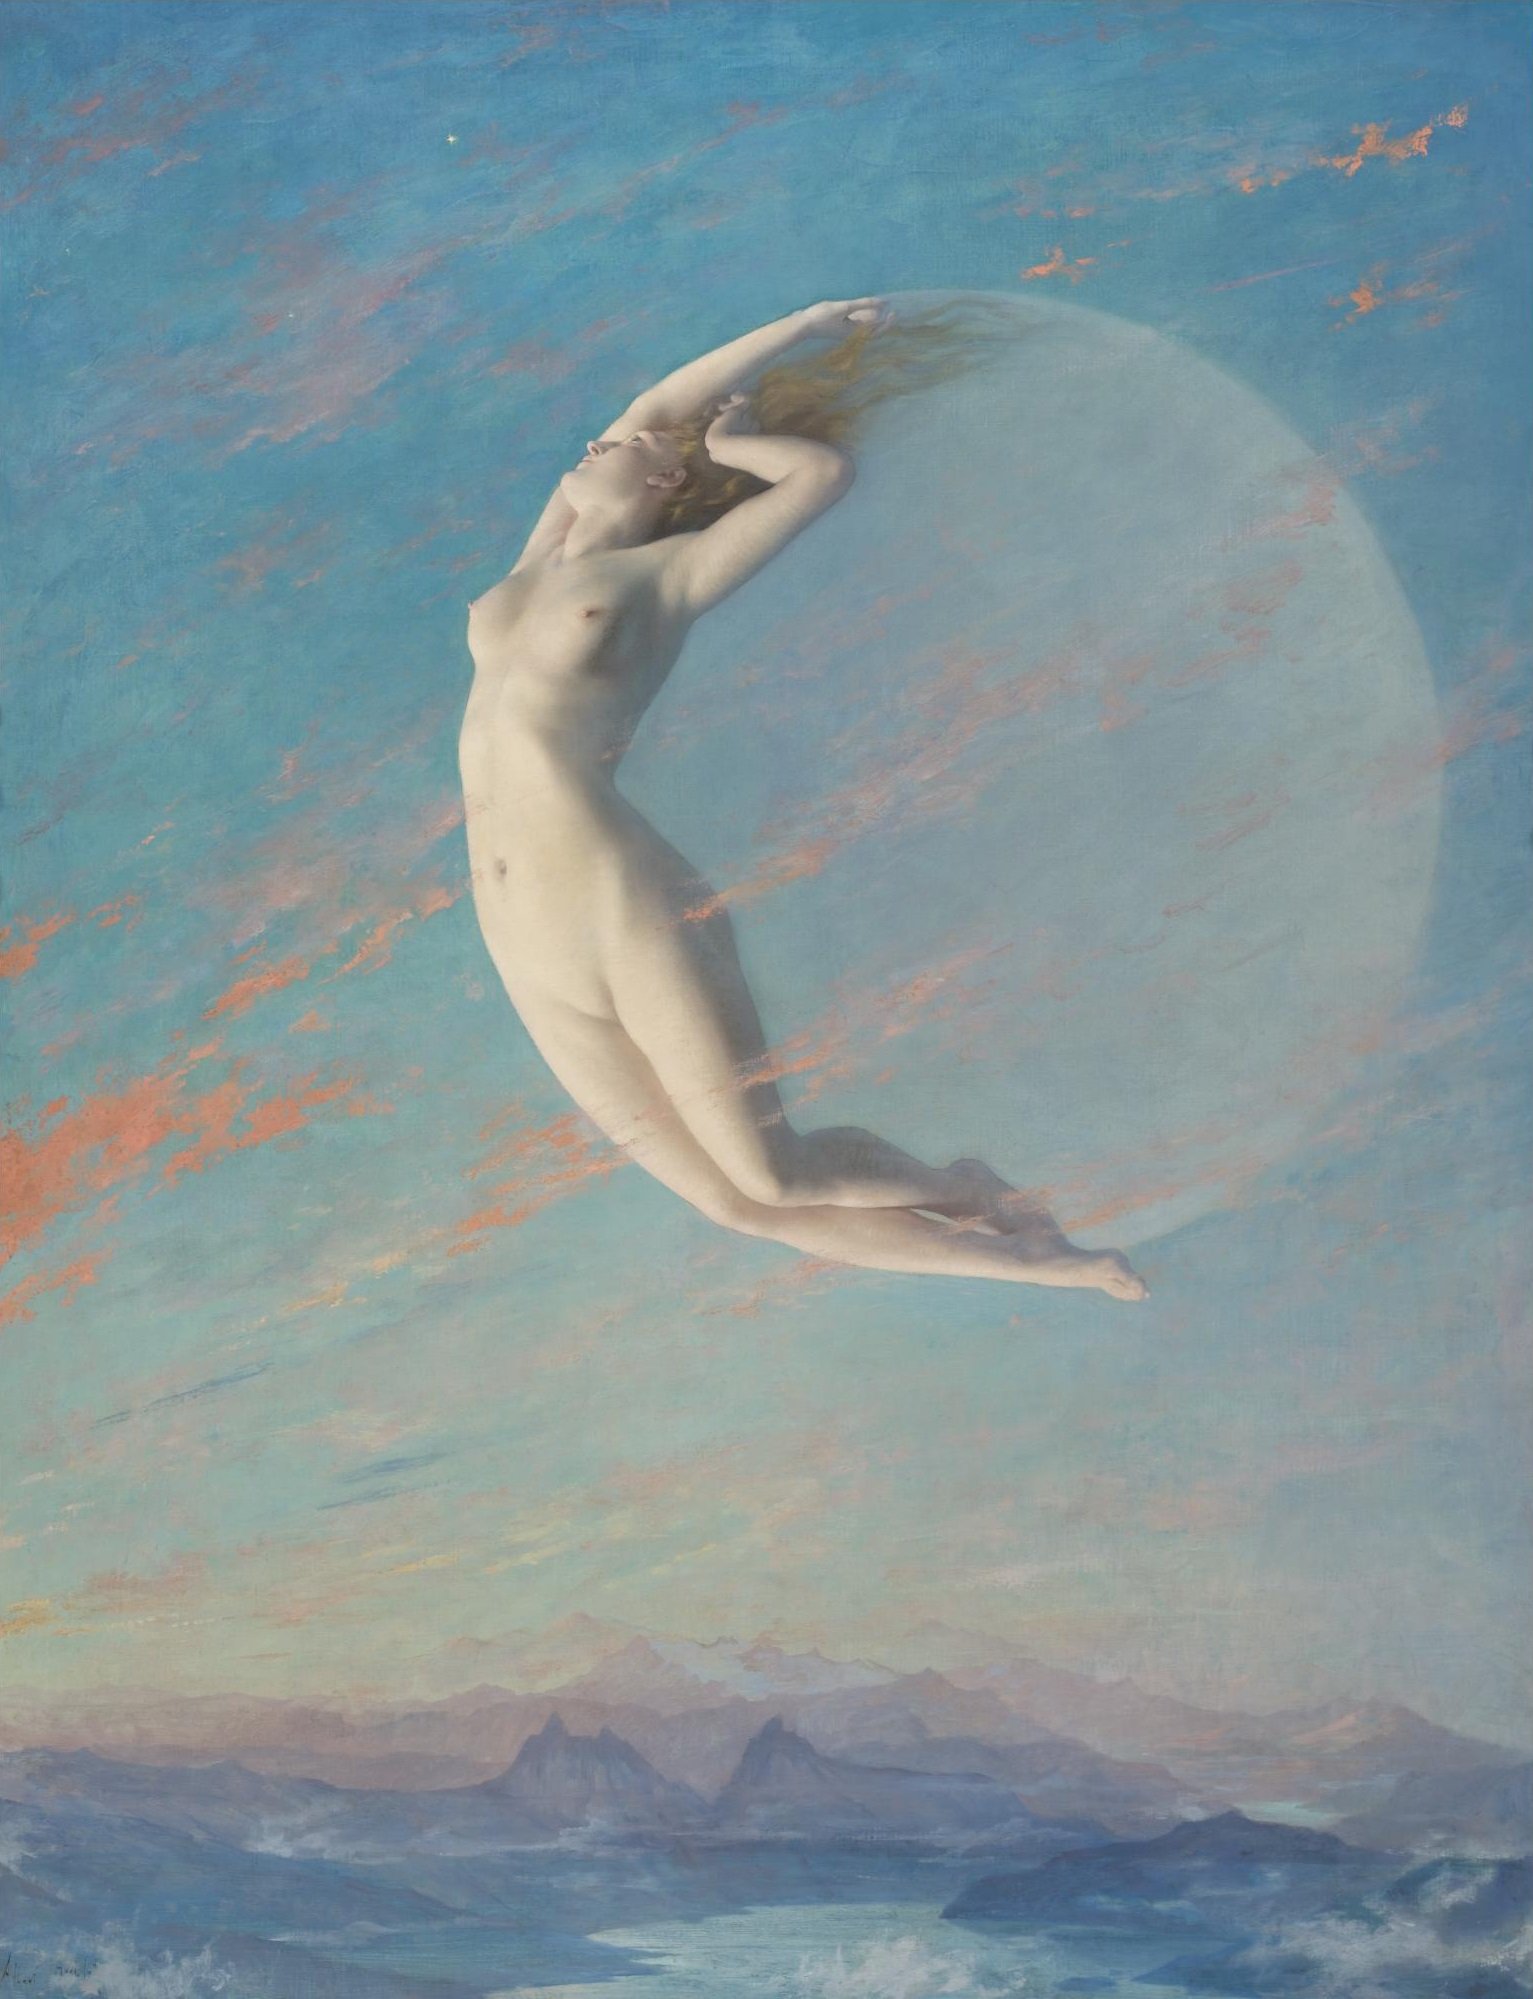 A painting of a woman shown as the Waning Crescent of the Moon